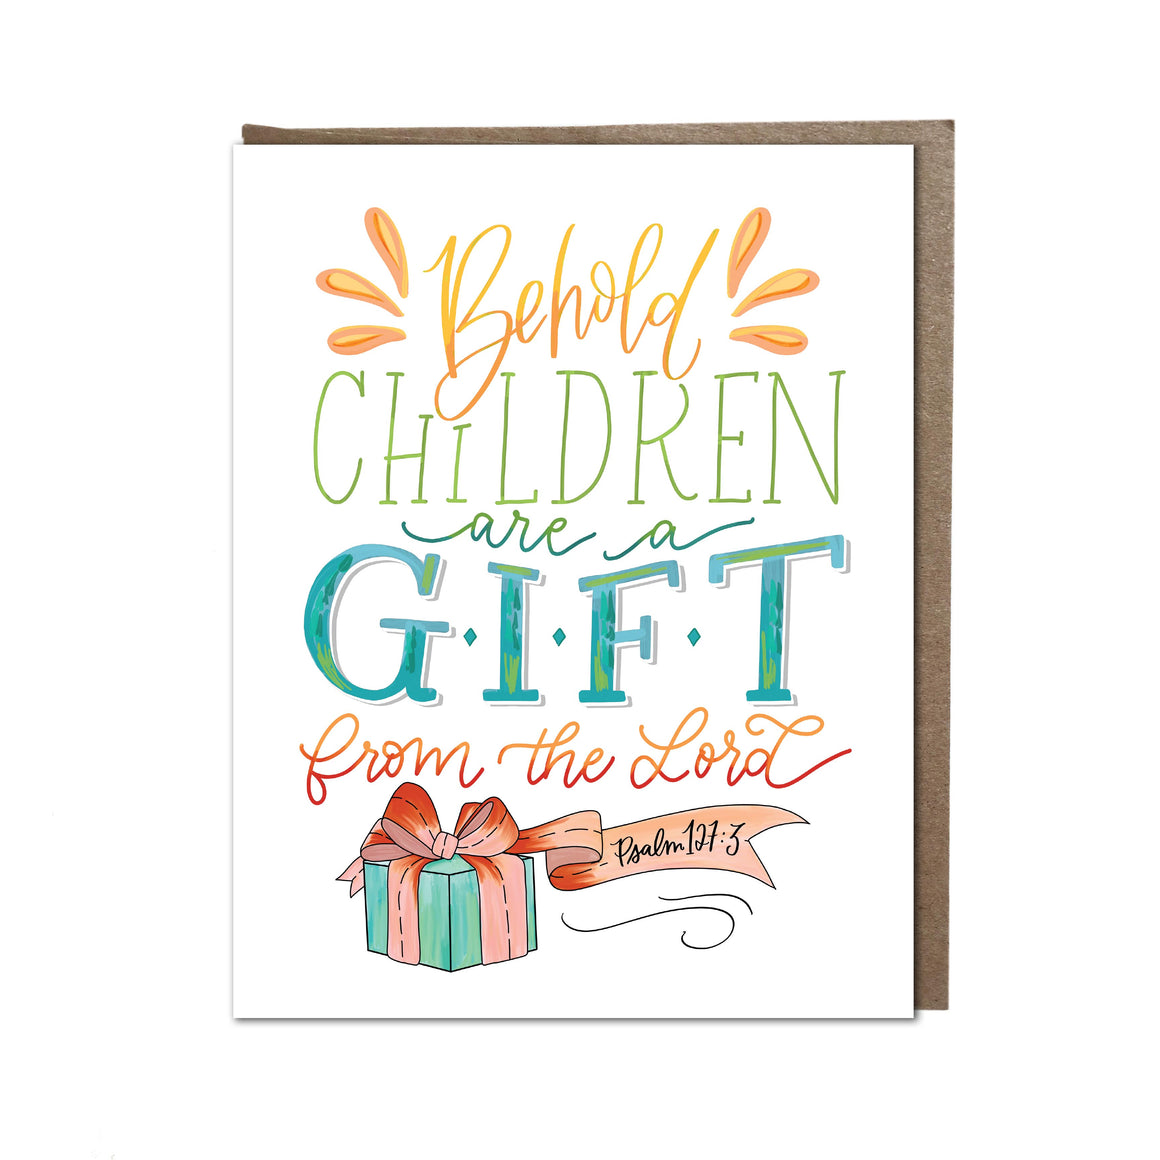 "Children are a Gift" card